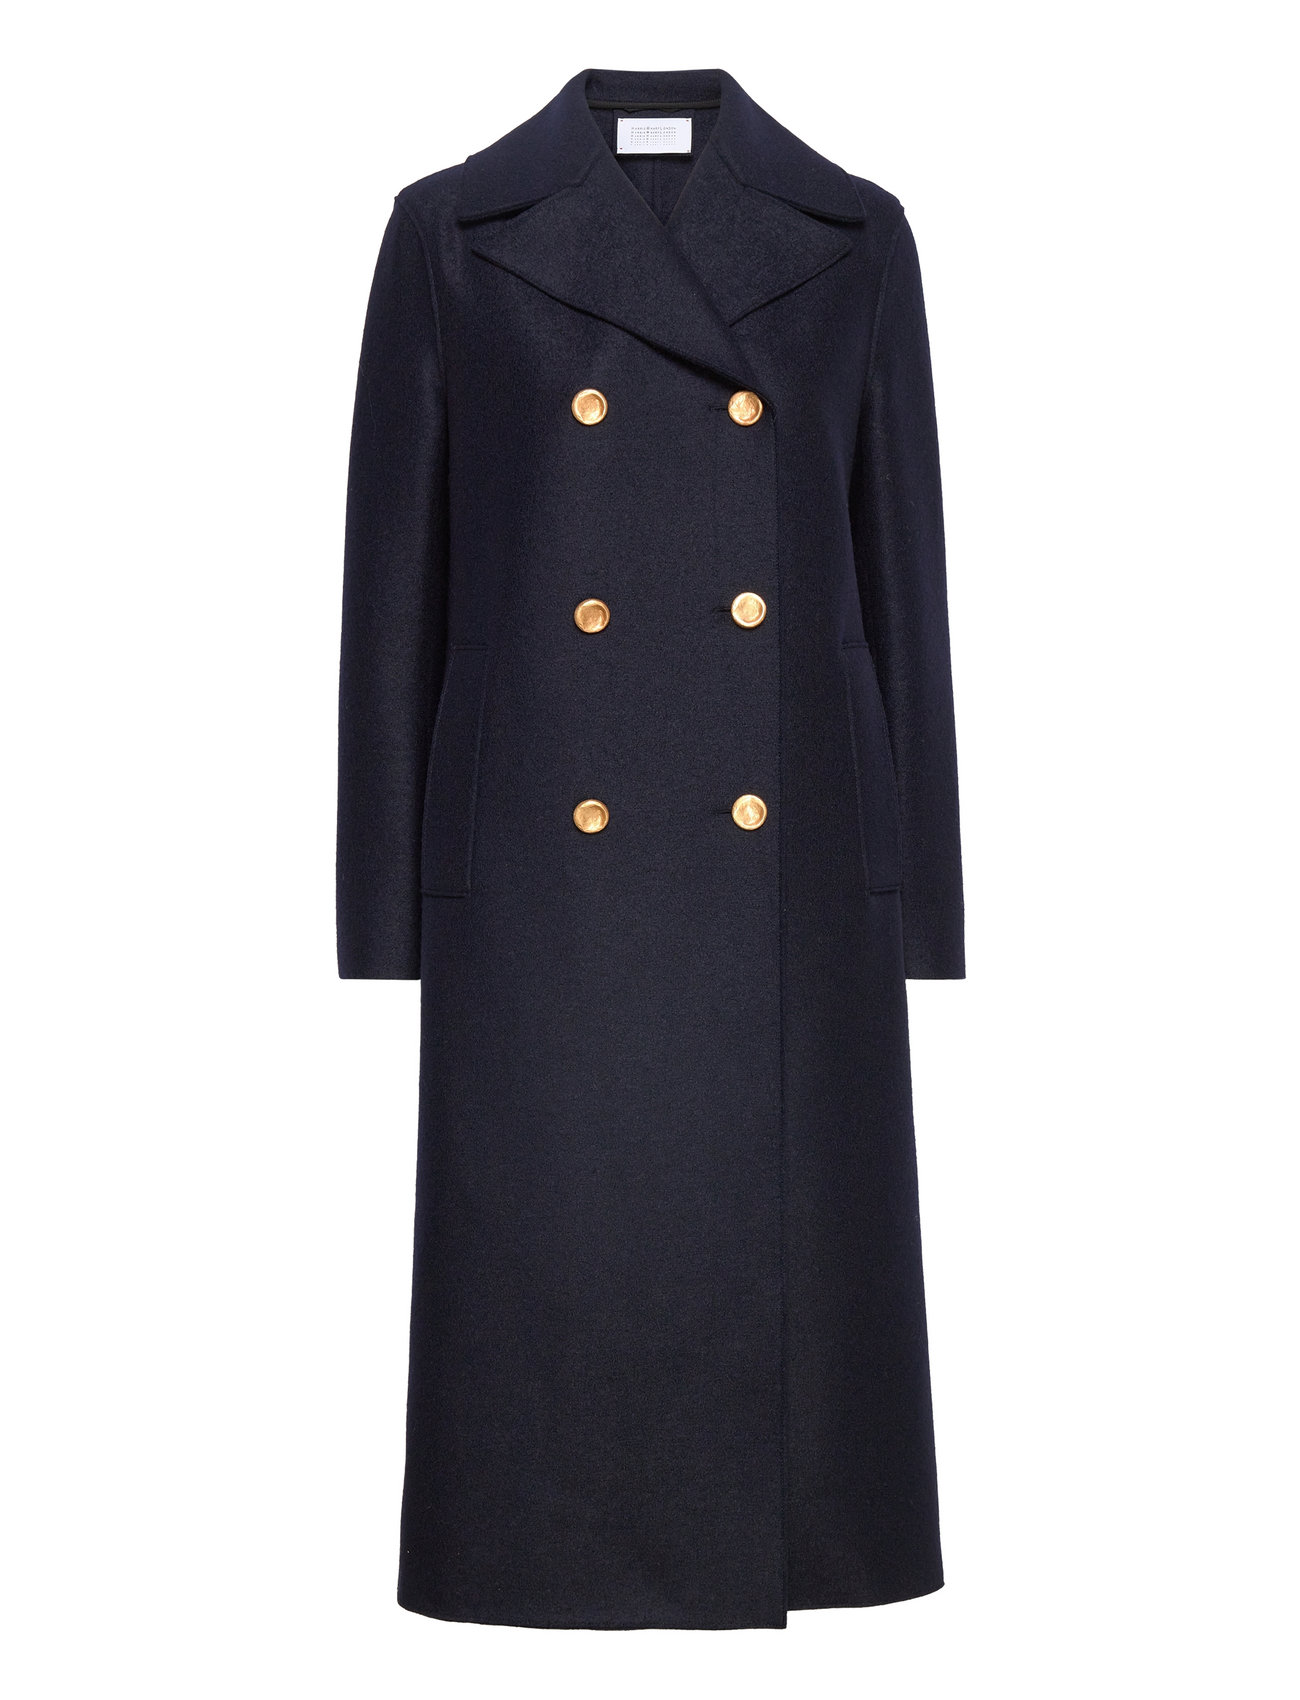 Harris Wharf London Women Military Coat With Golden Buttons Pressed